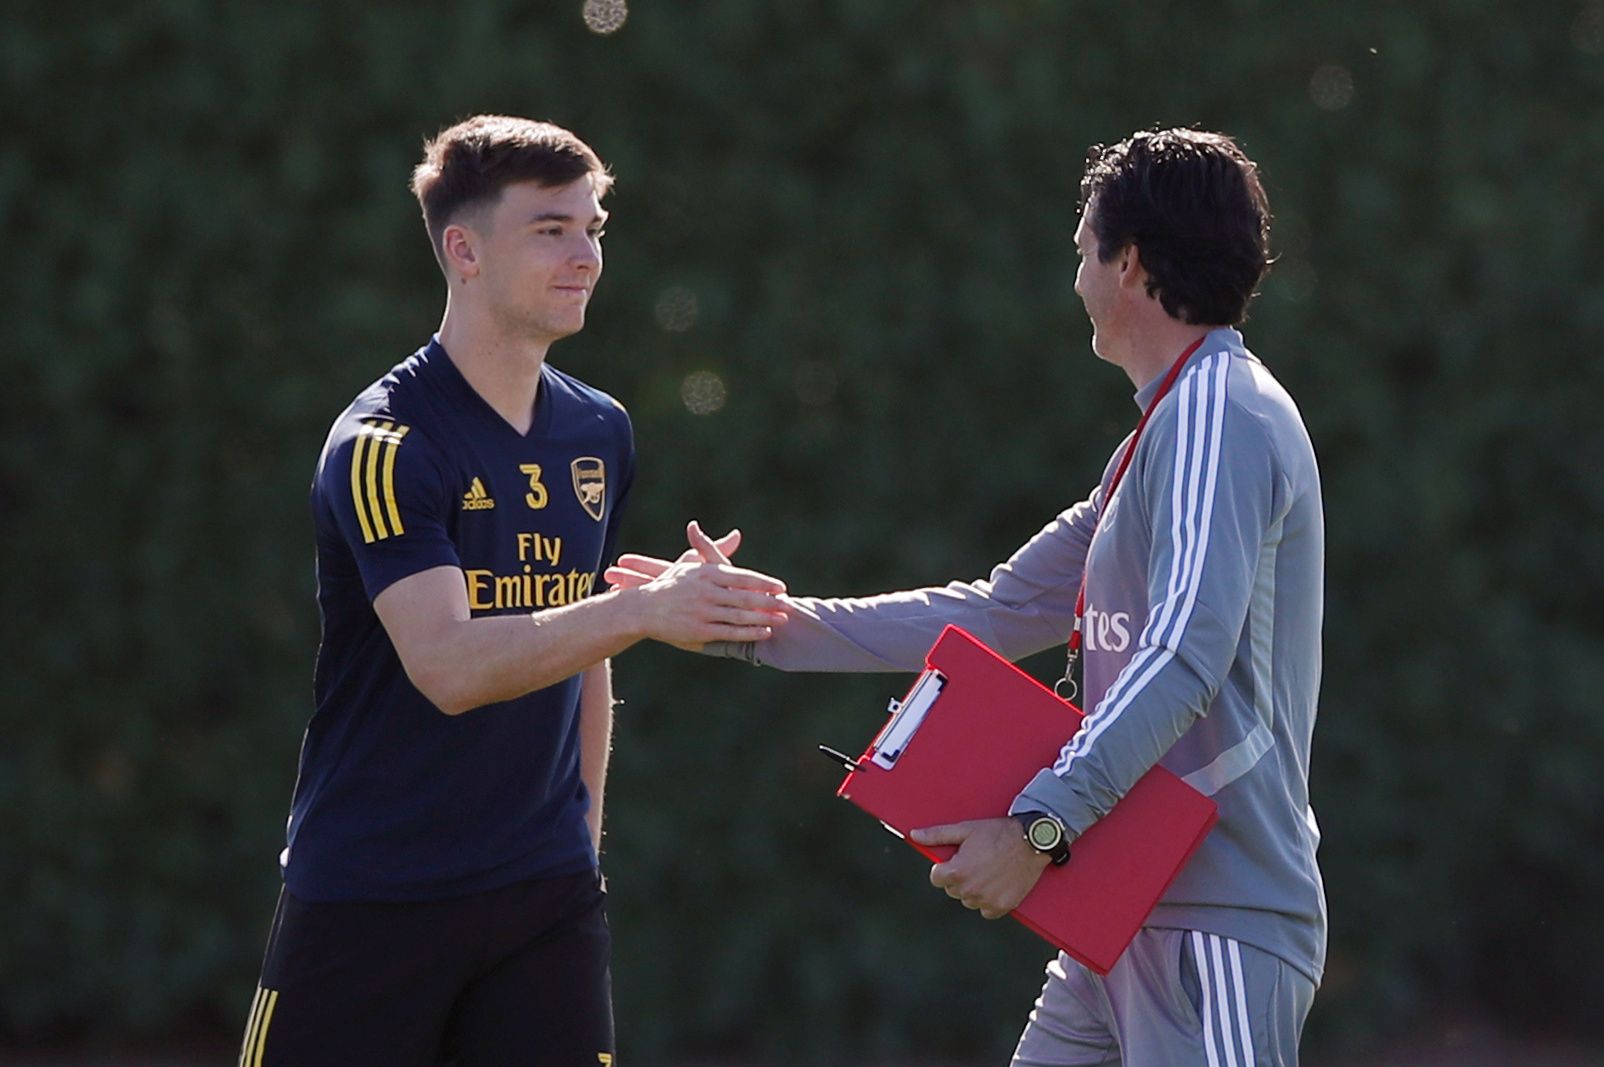 Soccer Football - Europa League - Arsenal Training - Arsenal Training Centre, St Albans, Britain - September 18, 2019   Arsenal manager Unai Emery and Kieran Tierney during training   Action Images via Reuters/Paul Childs